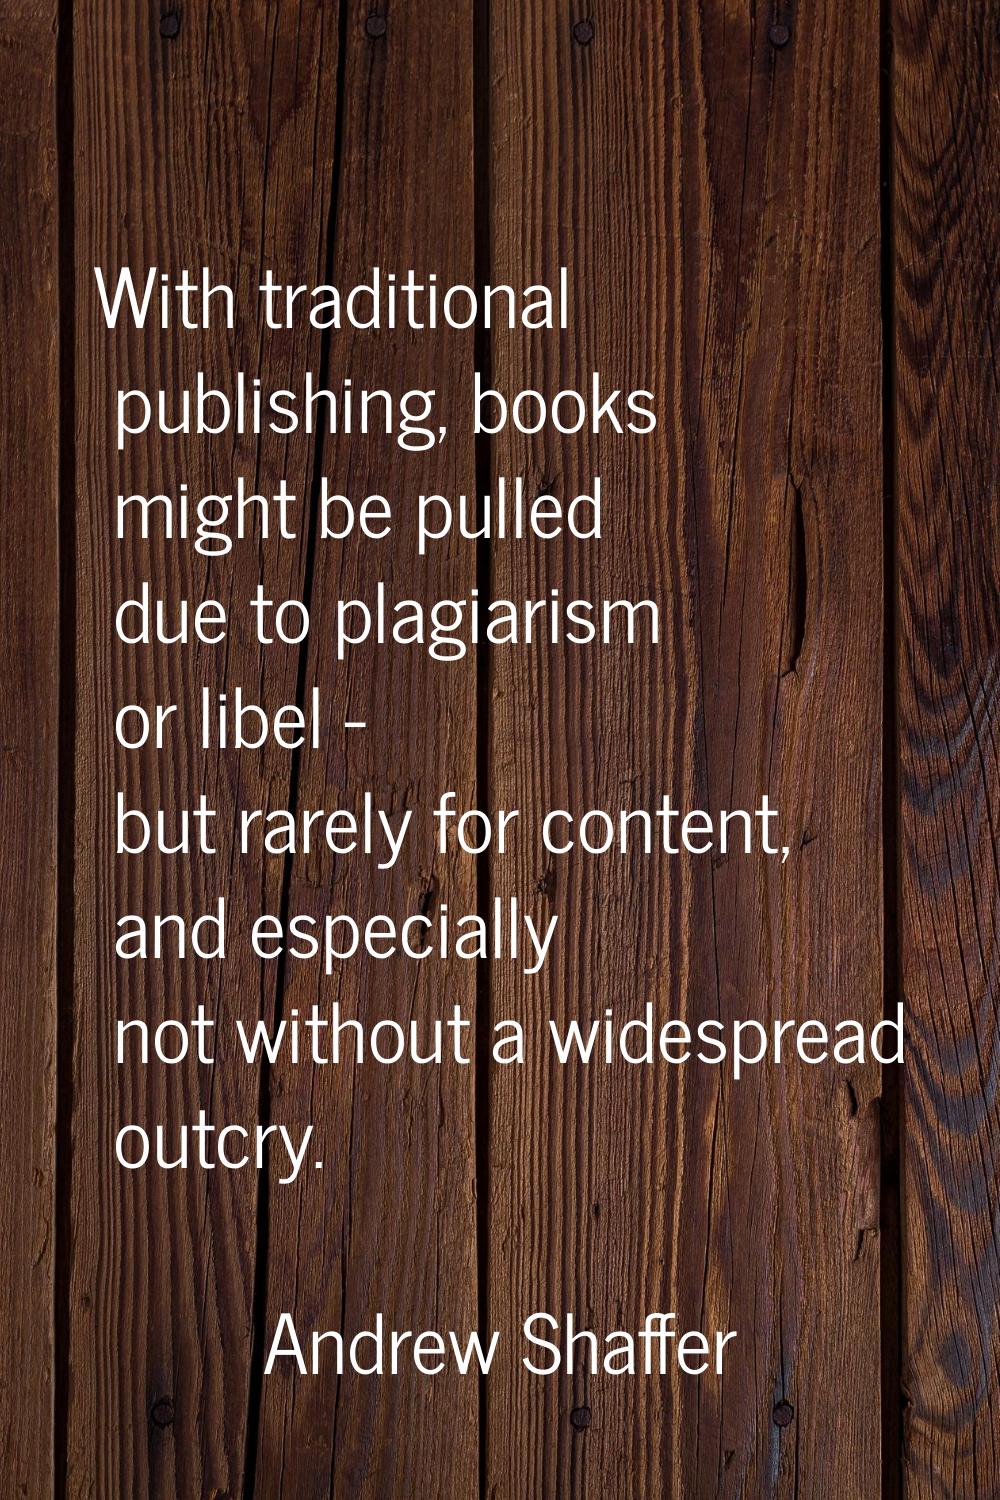 With traditional publishing, books might be pulled due to plagiarism or libel - but rarely for cont